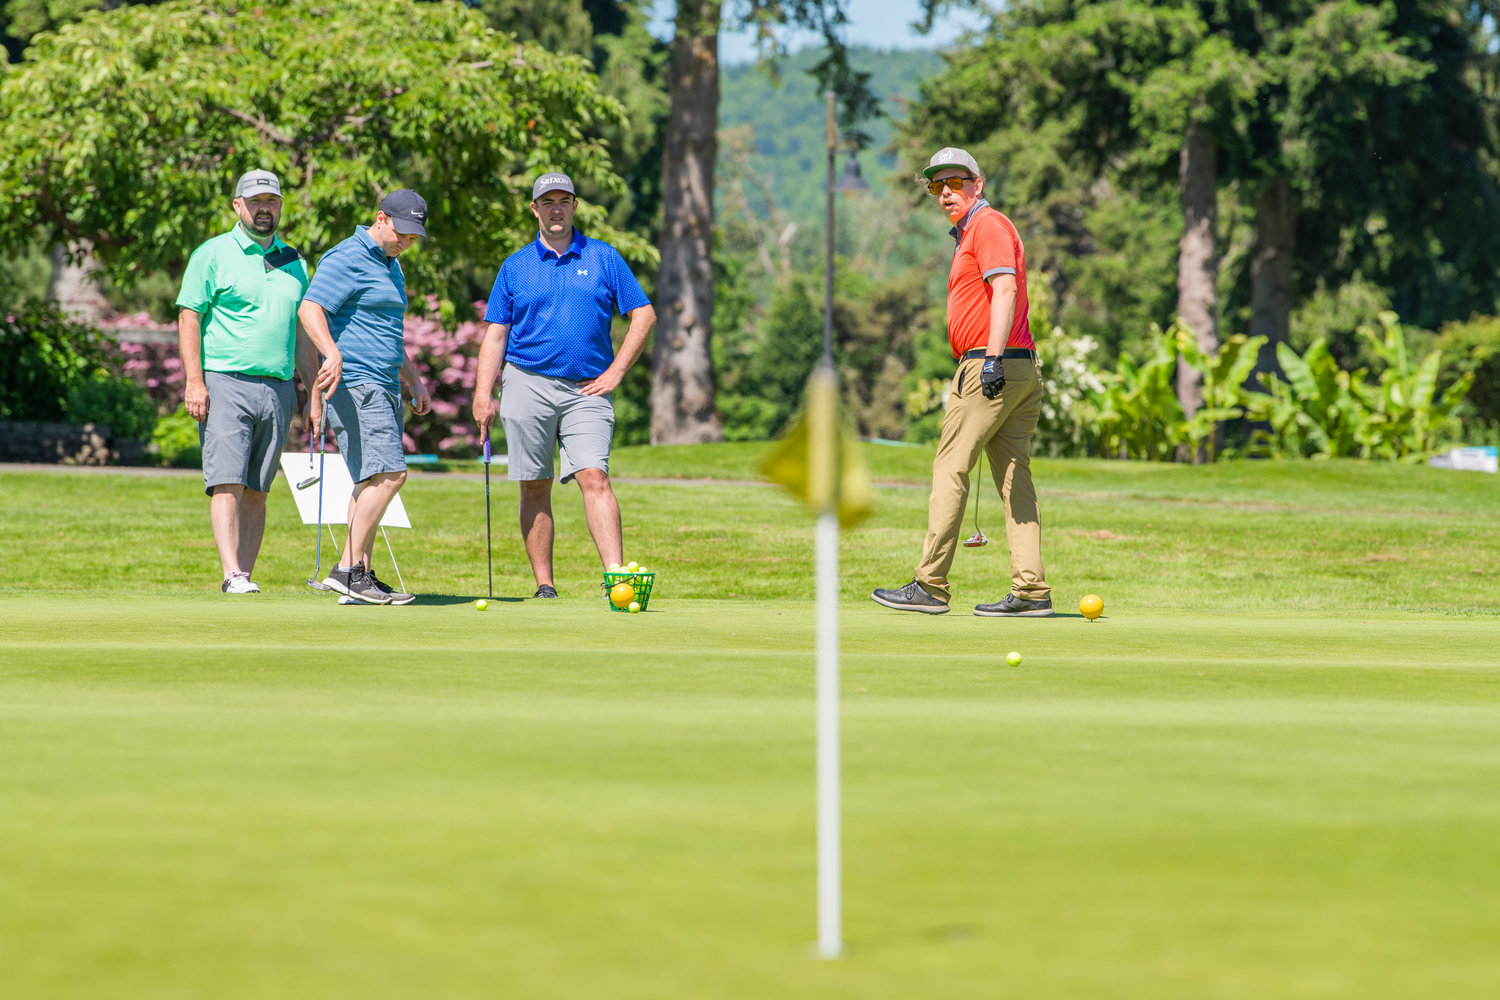 Gabriel Michael watches a put during a charity golf tournament raising money for the Hope Alliance Friday in Chehalis.